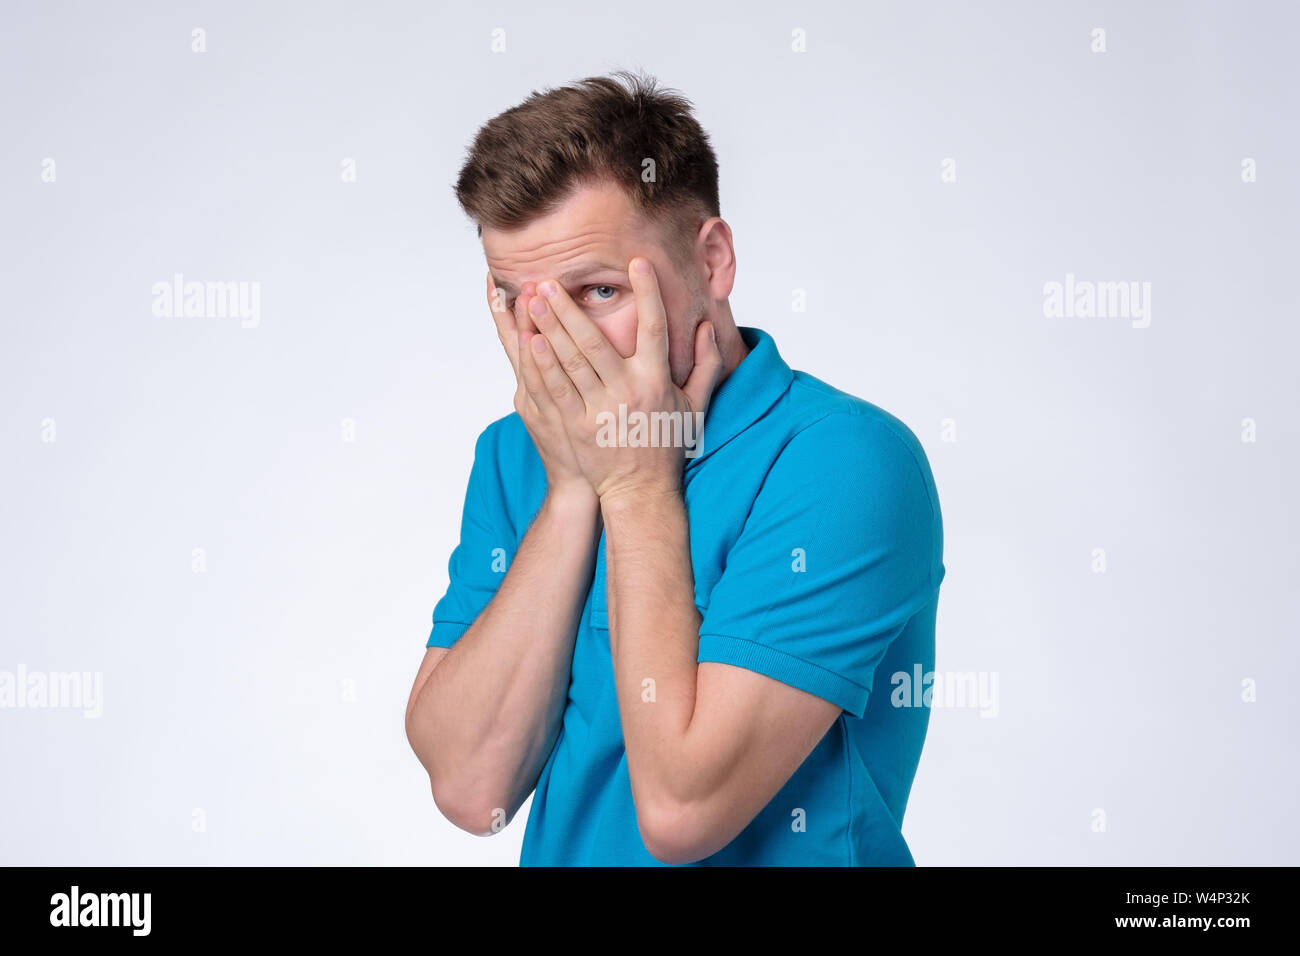 Man in blue t-shirt hiding cover face with hands, looking shy Stock Photo